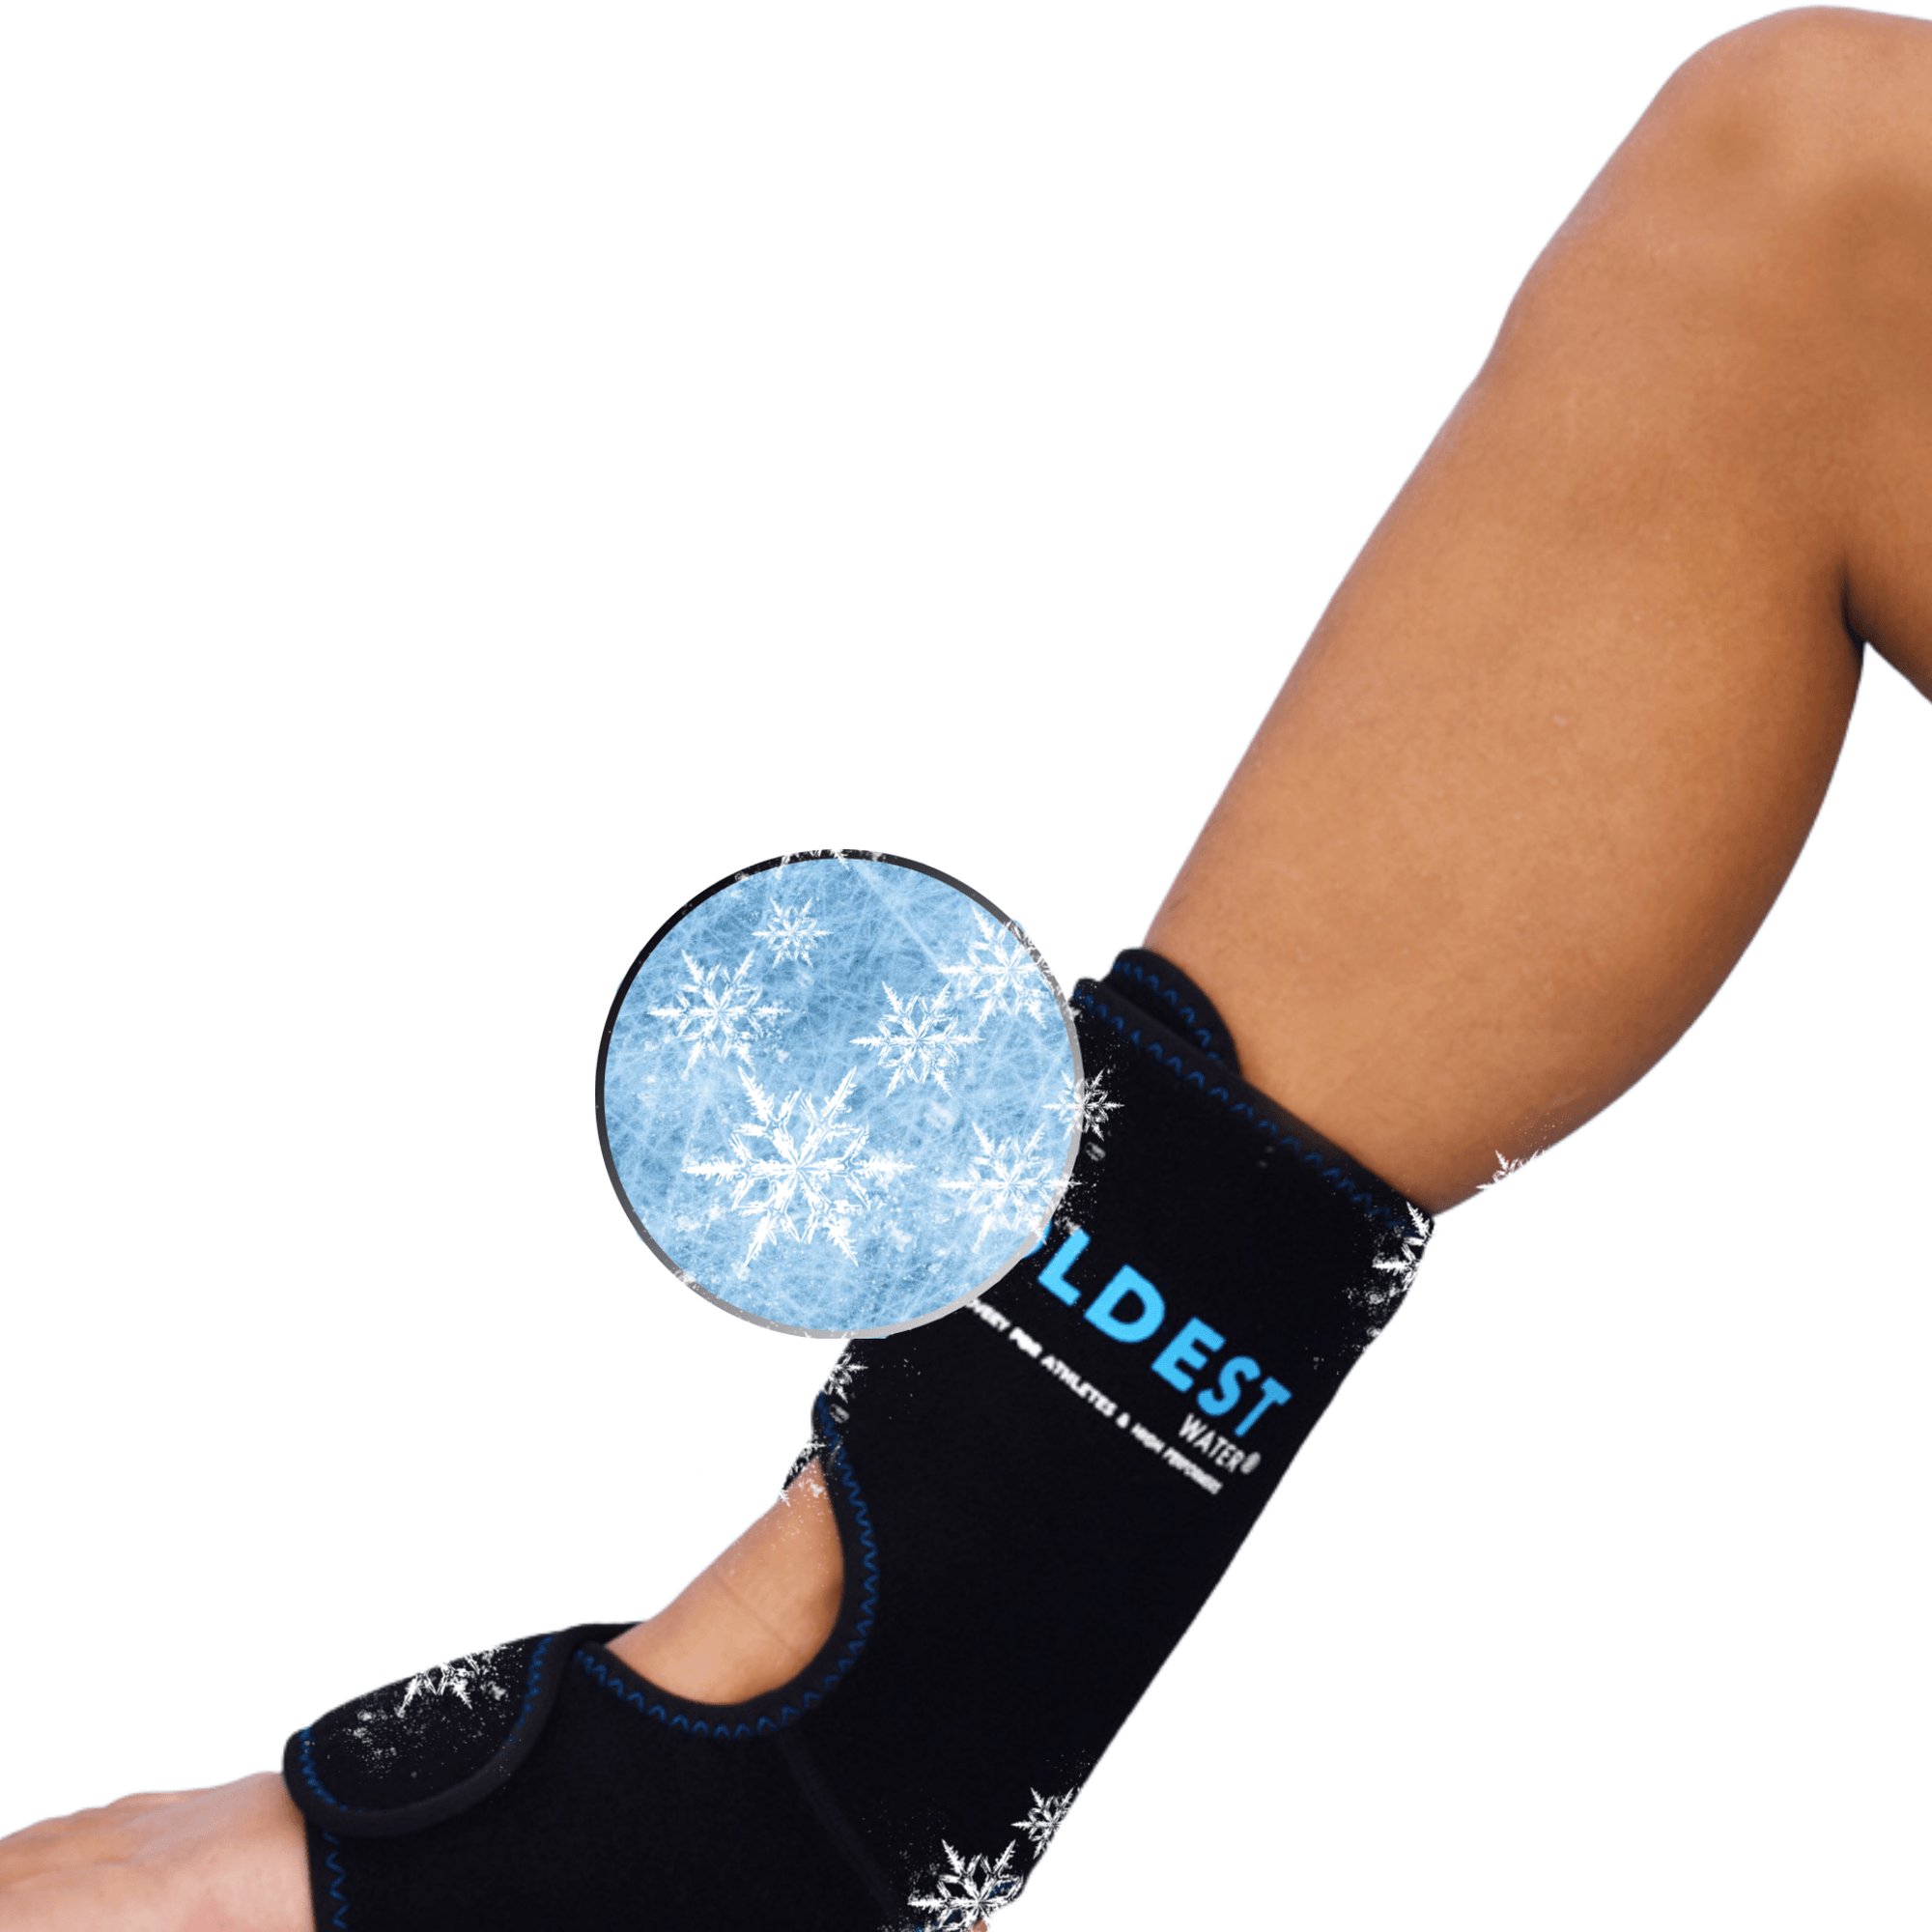 Ankle Ice Pack - Coldest